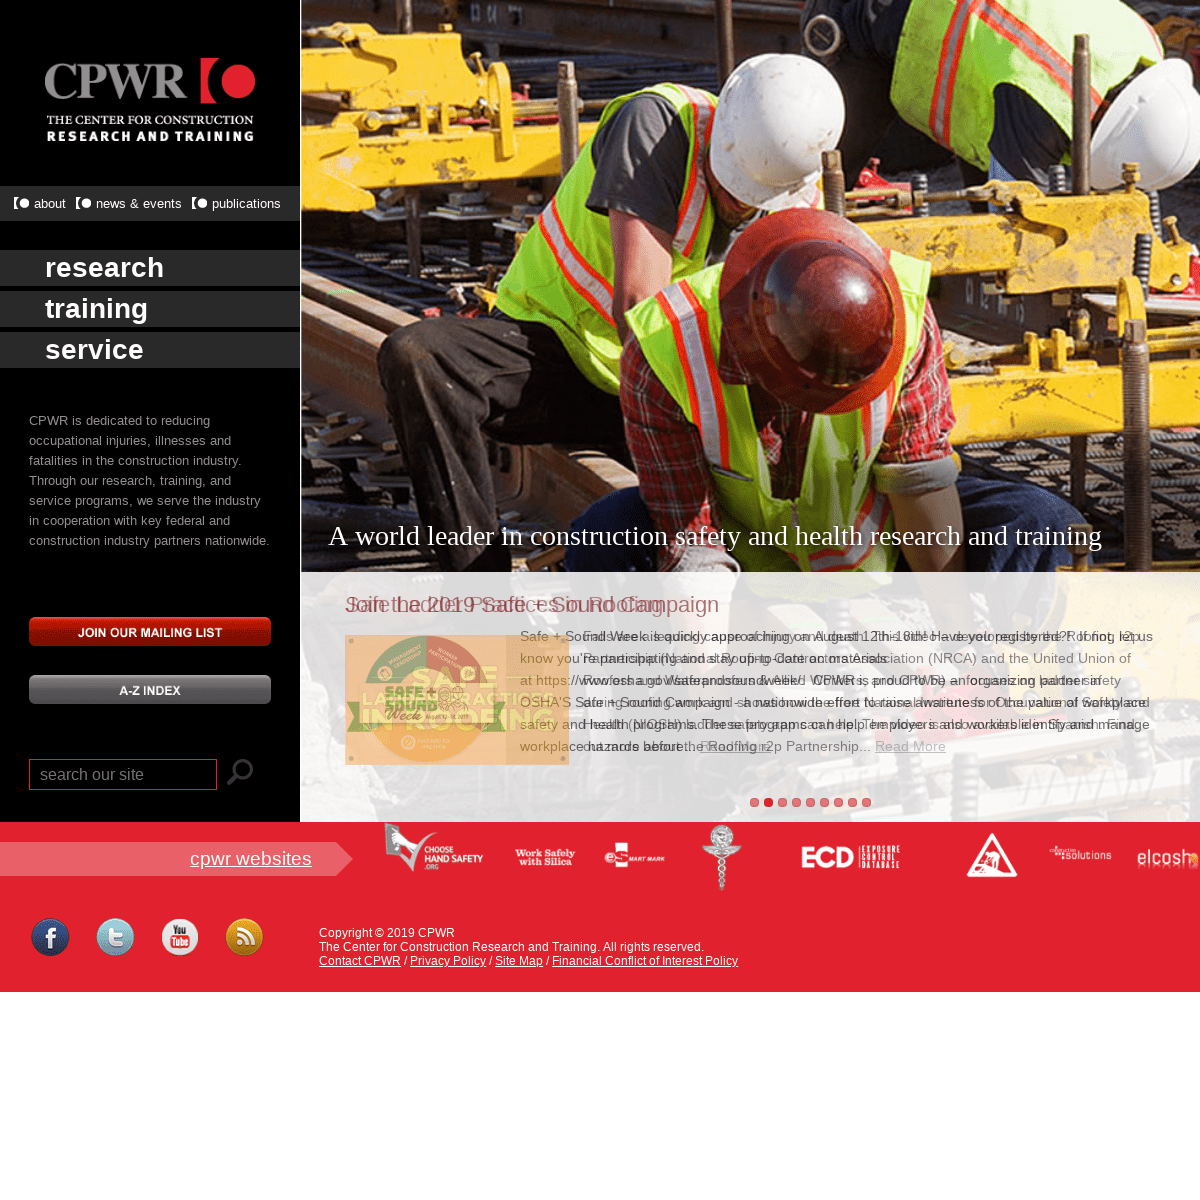 CPWR | A world leader in construction safety and health research and training